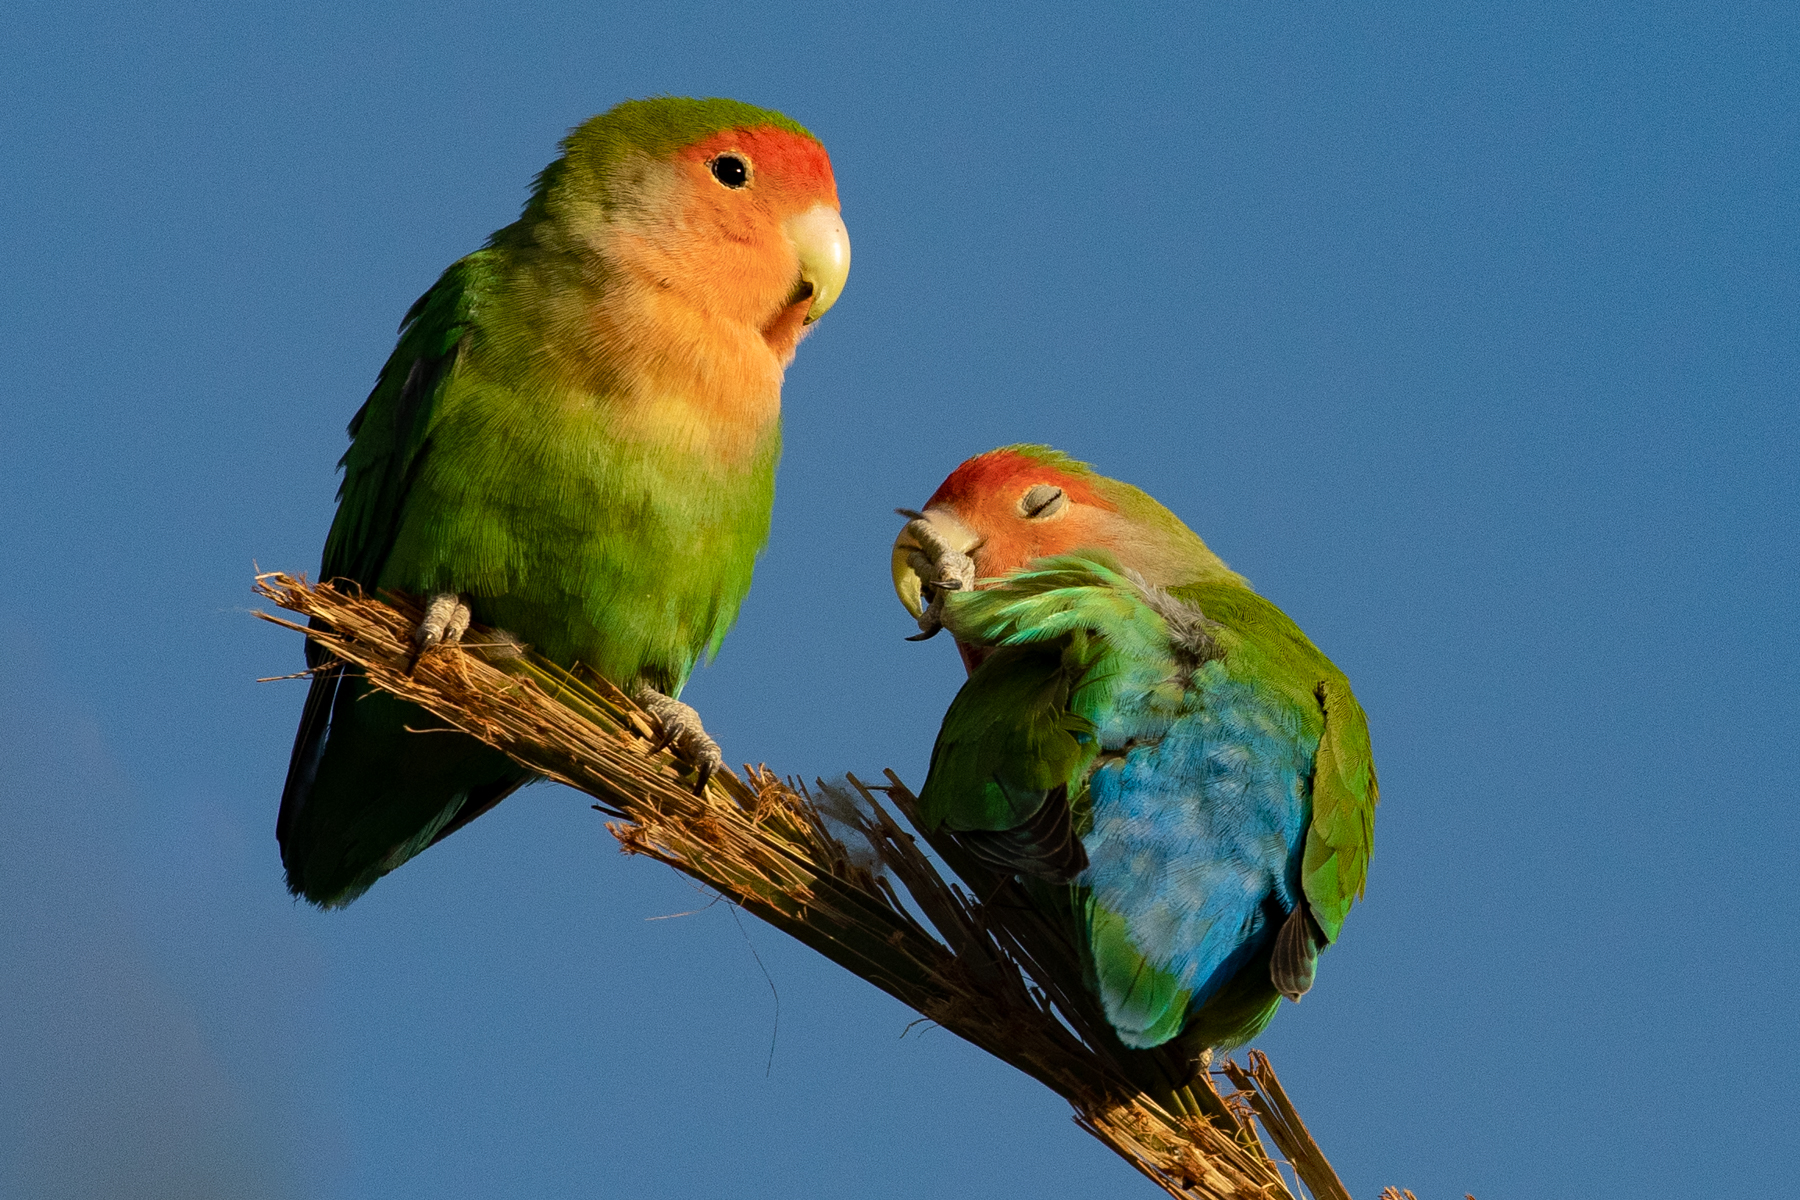 A pair of Rosy-faced Lovebirds enjoy the early morning sun at the Quiver Tree Forest